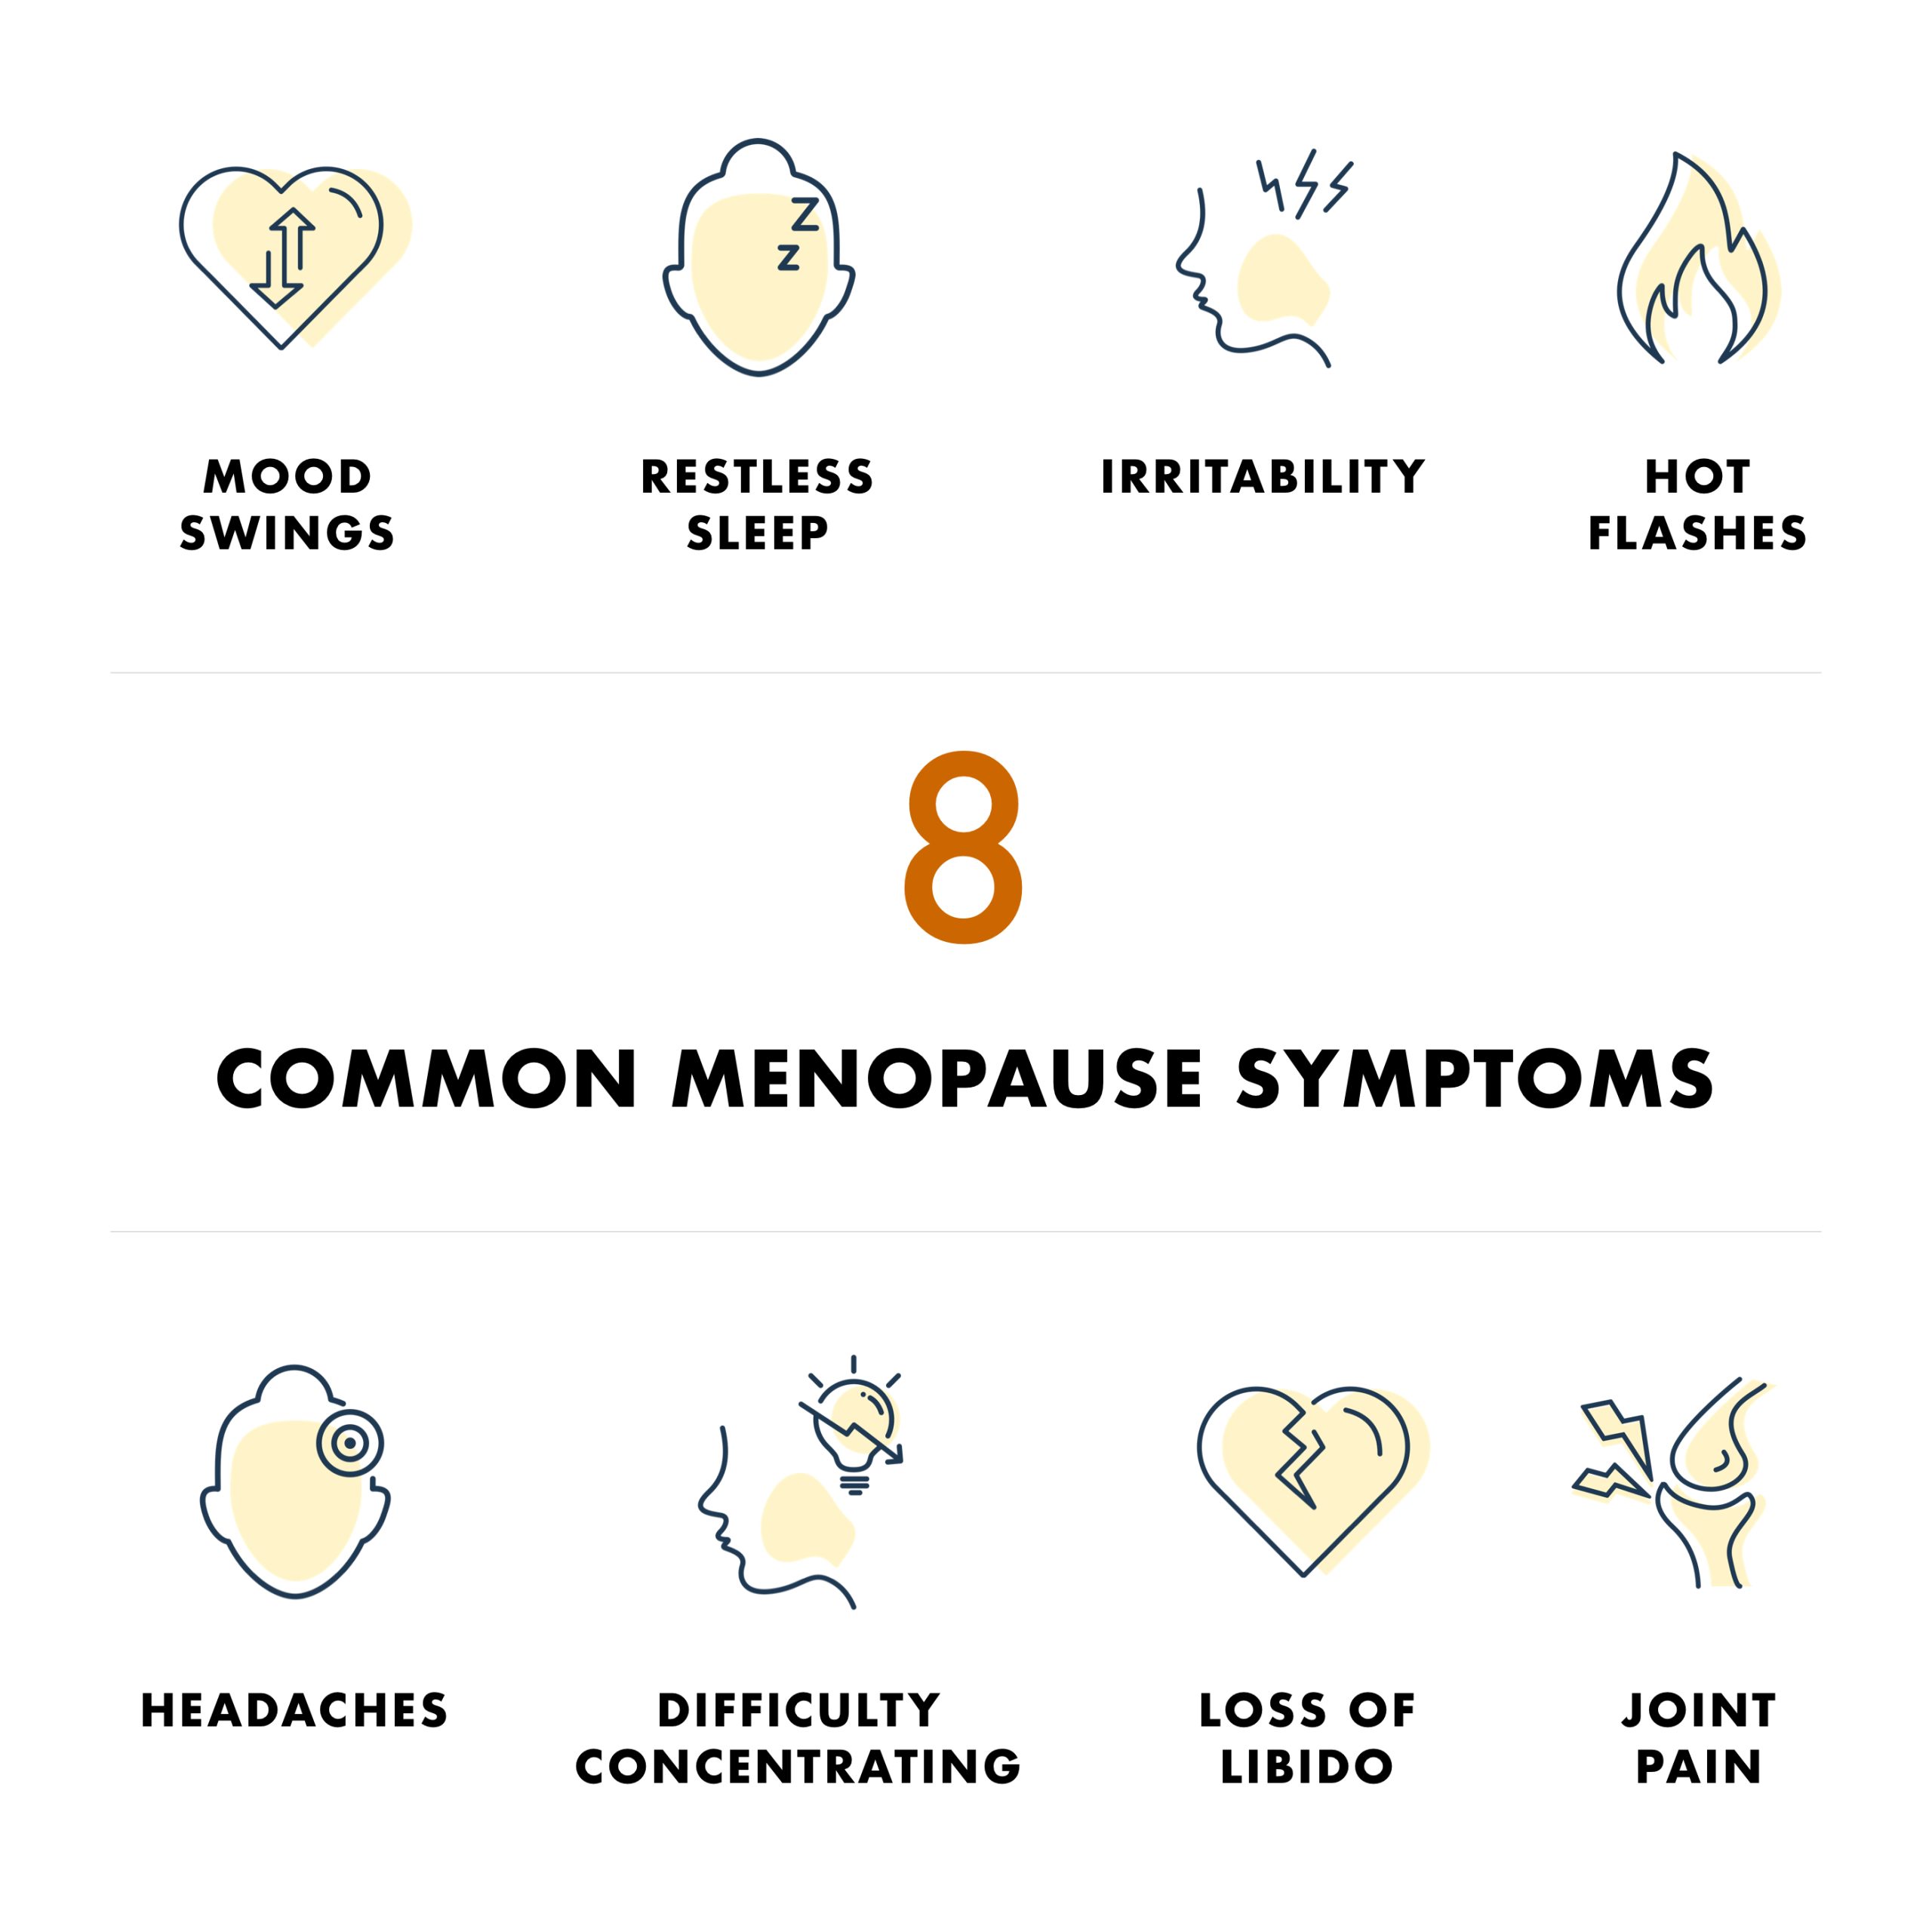 Women’s Wellness: Your Guide to Navigating Menopause.